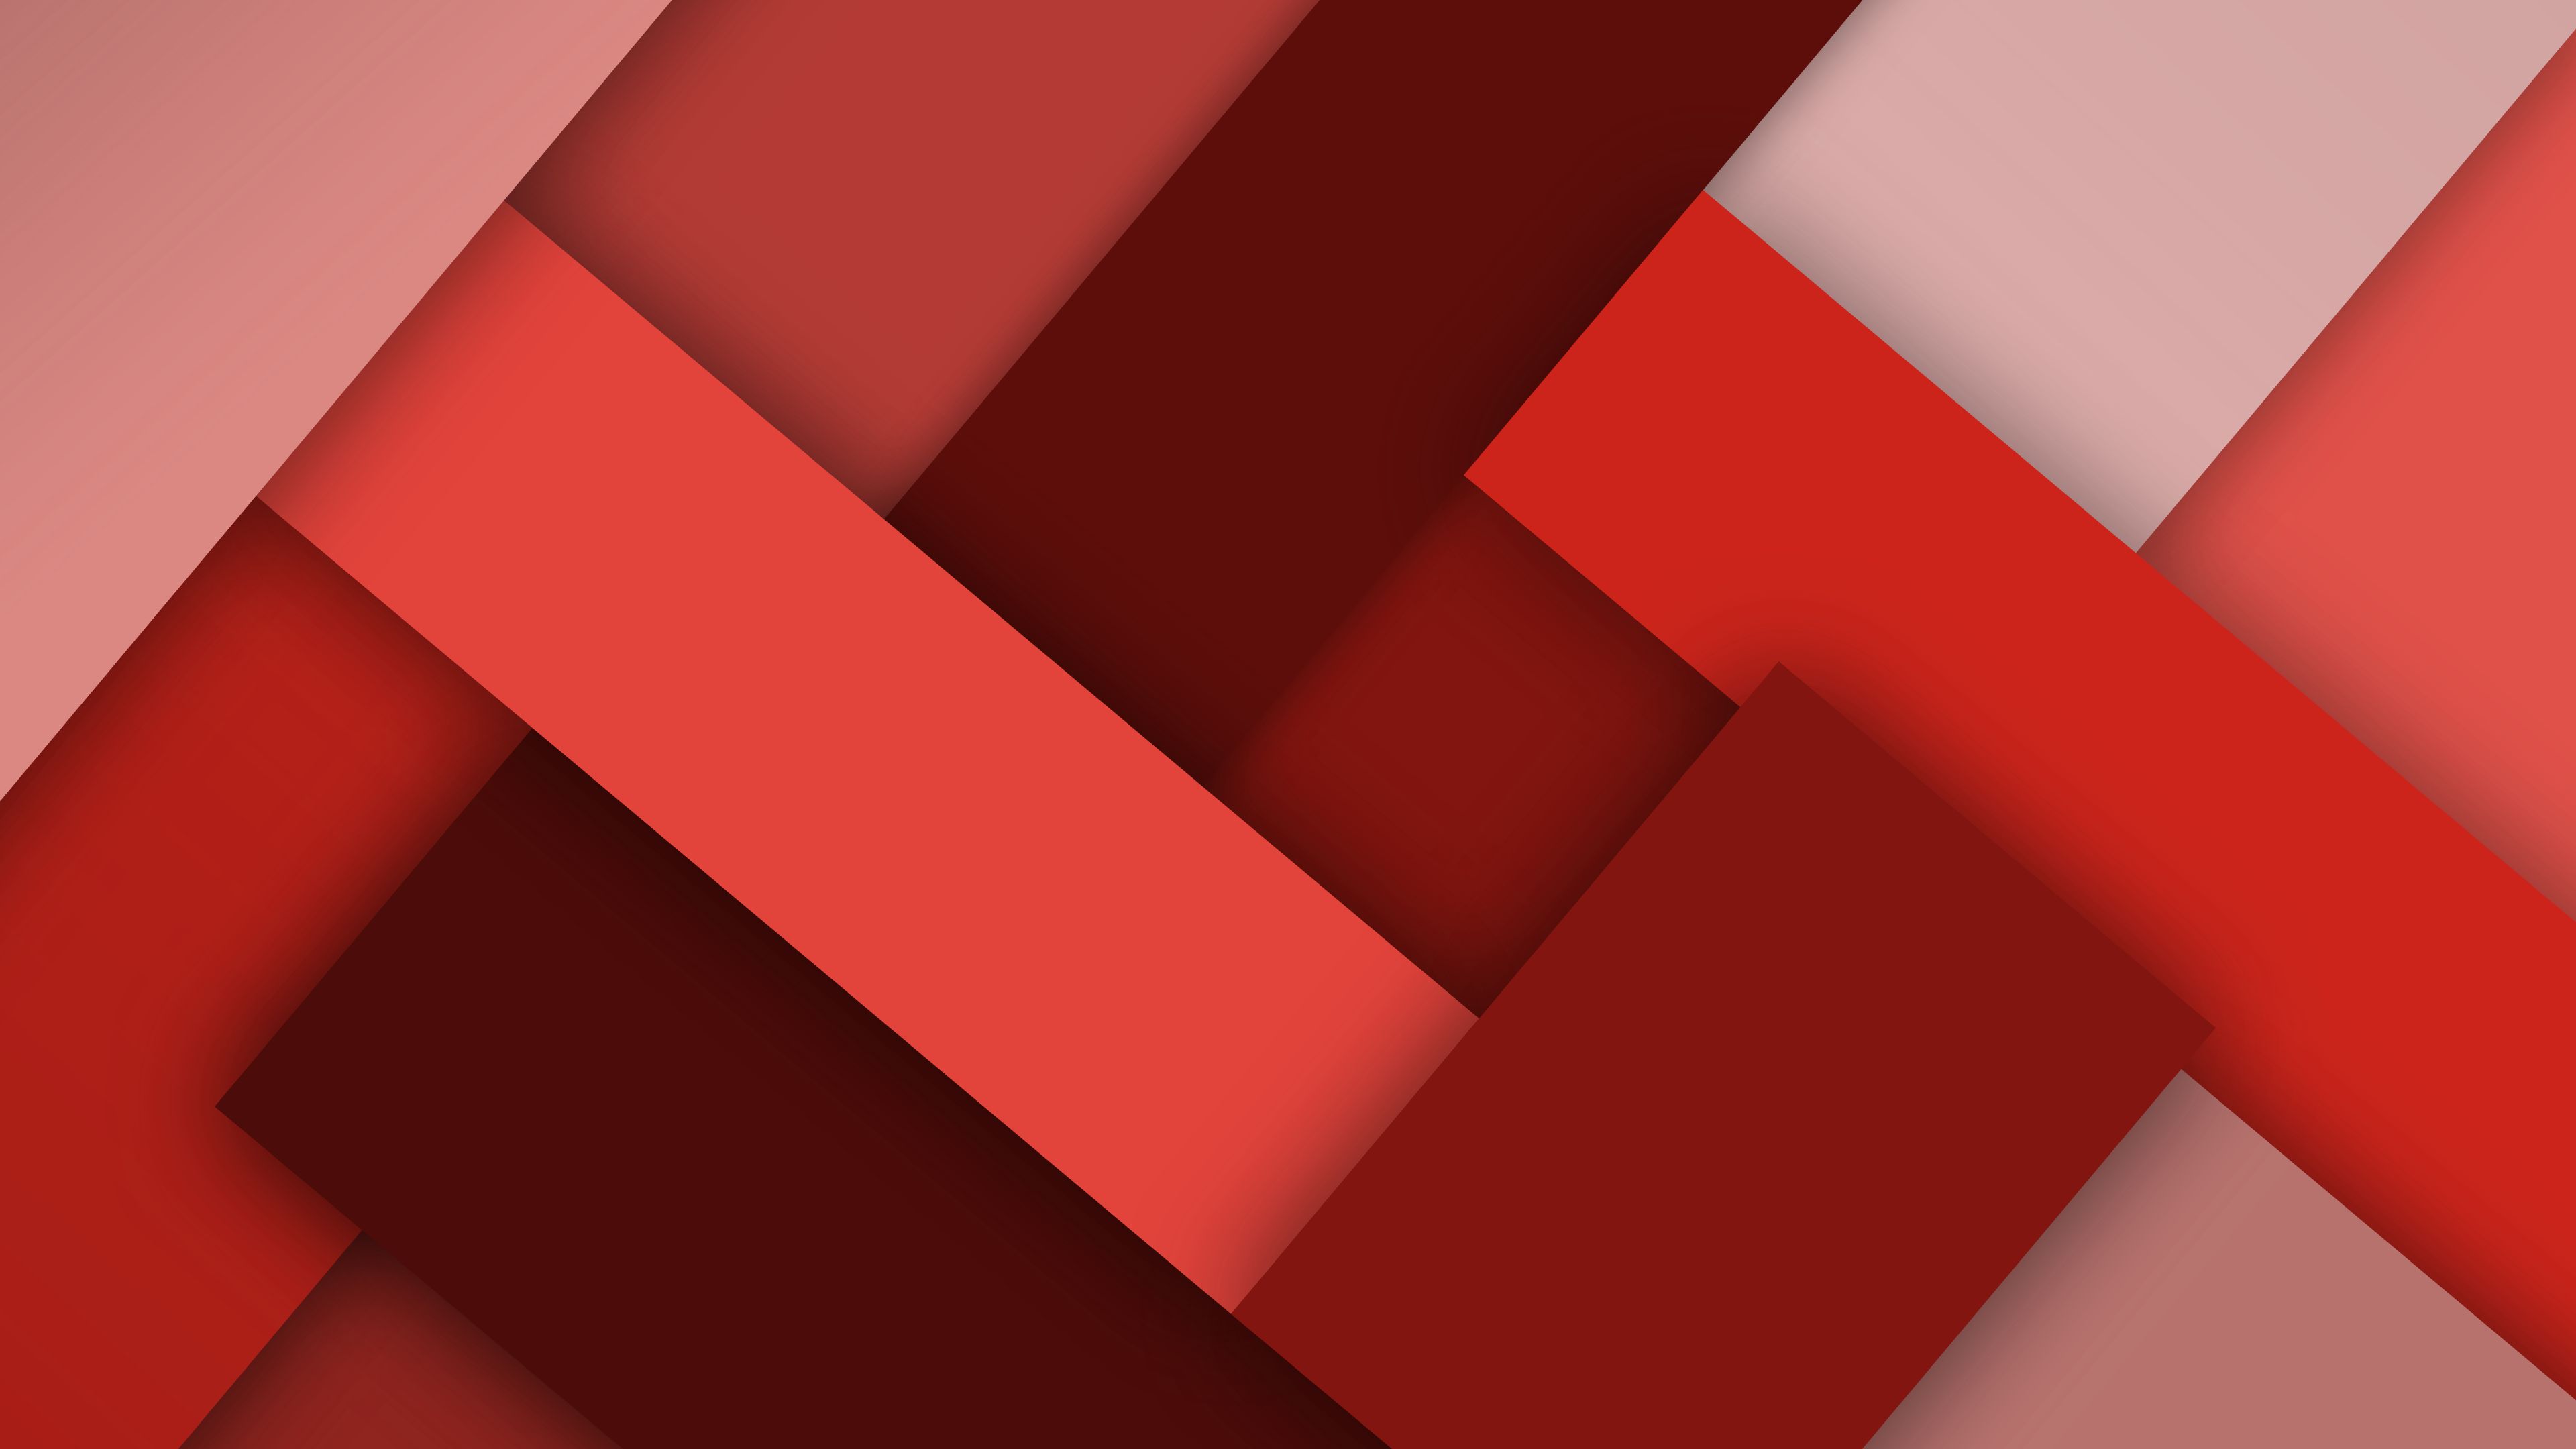 design, red, artistic, abstract